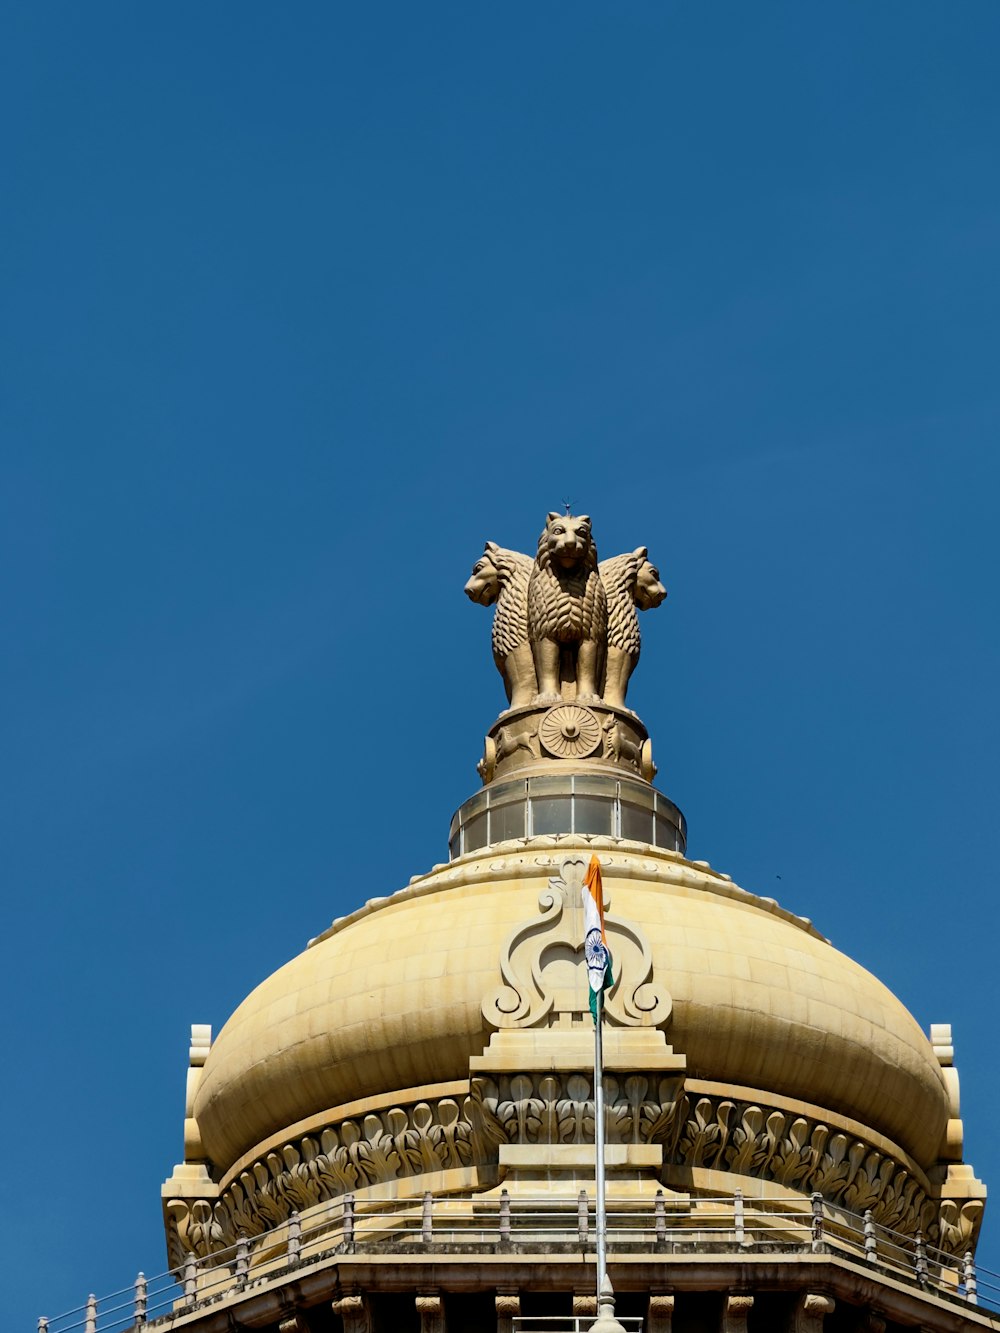 the top of a building with a statue on top of it